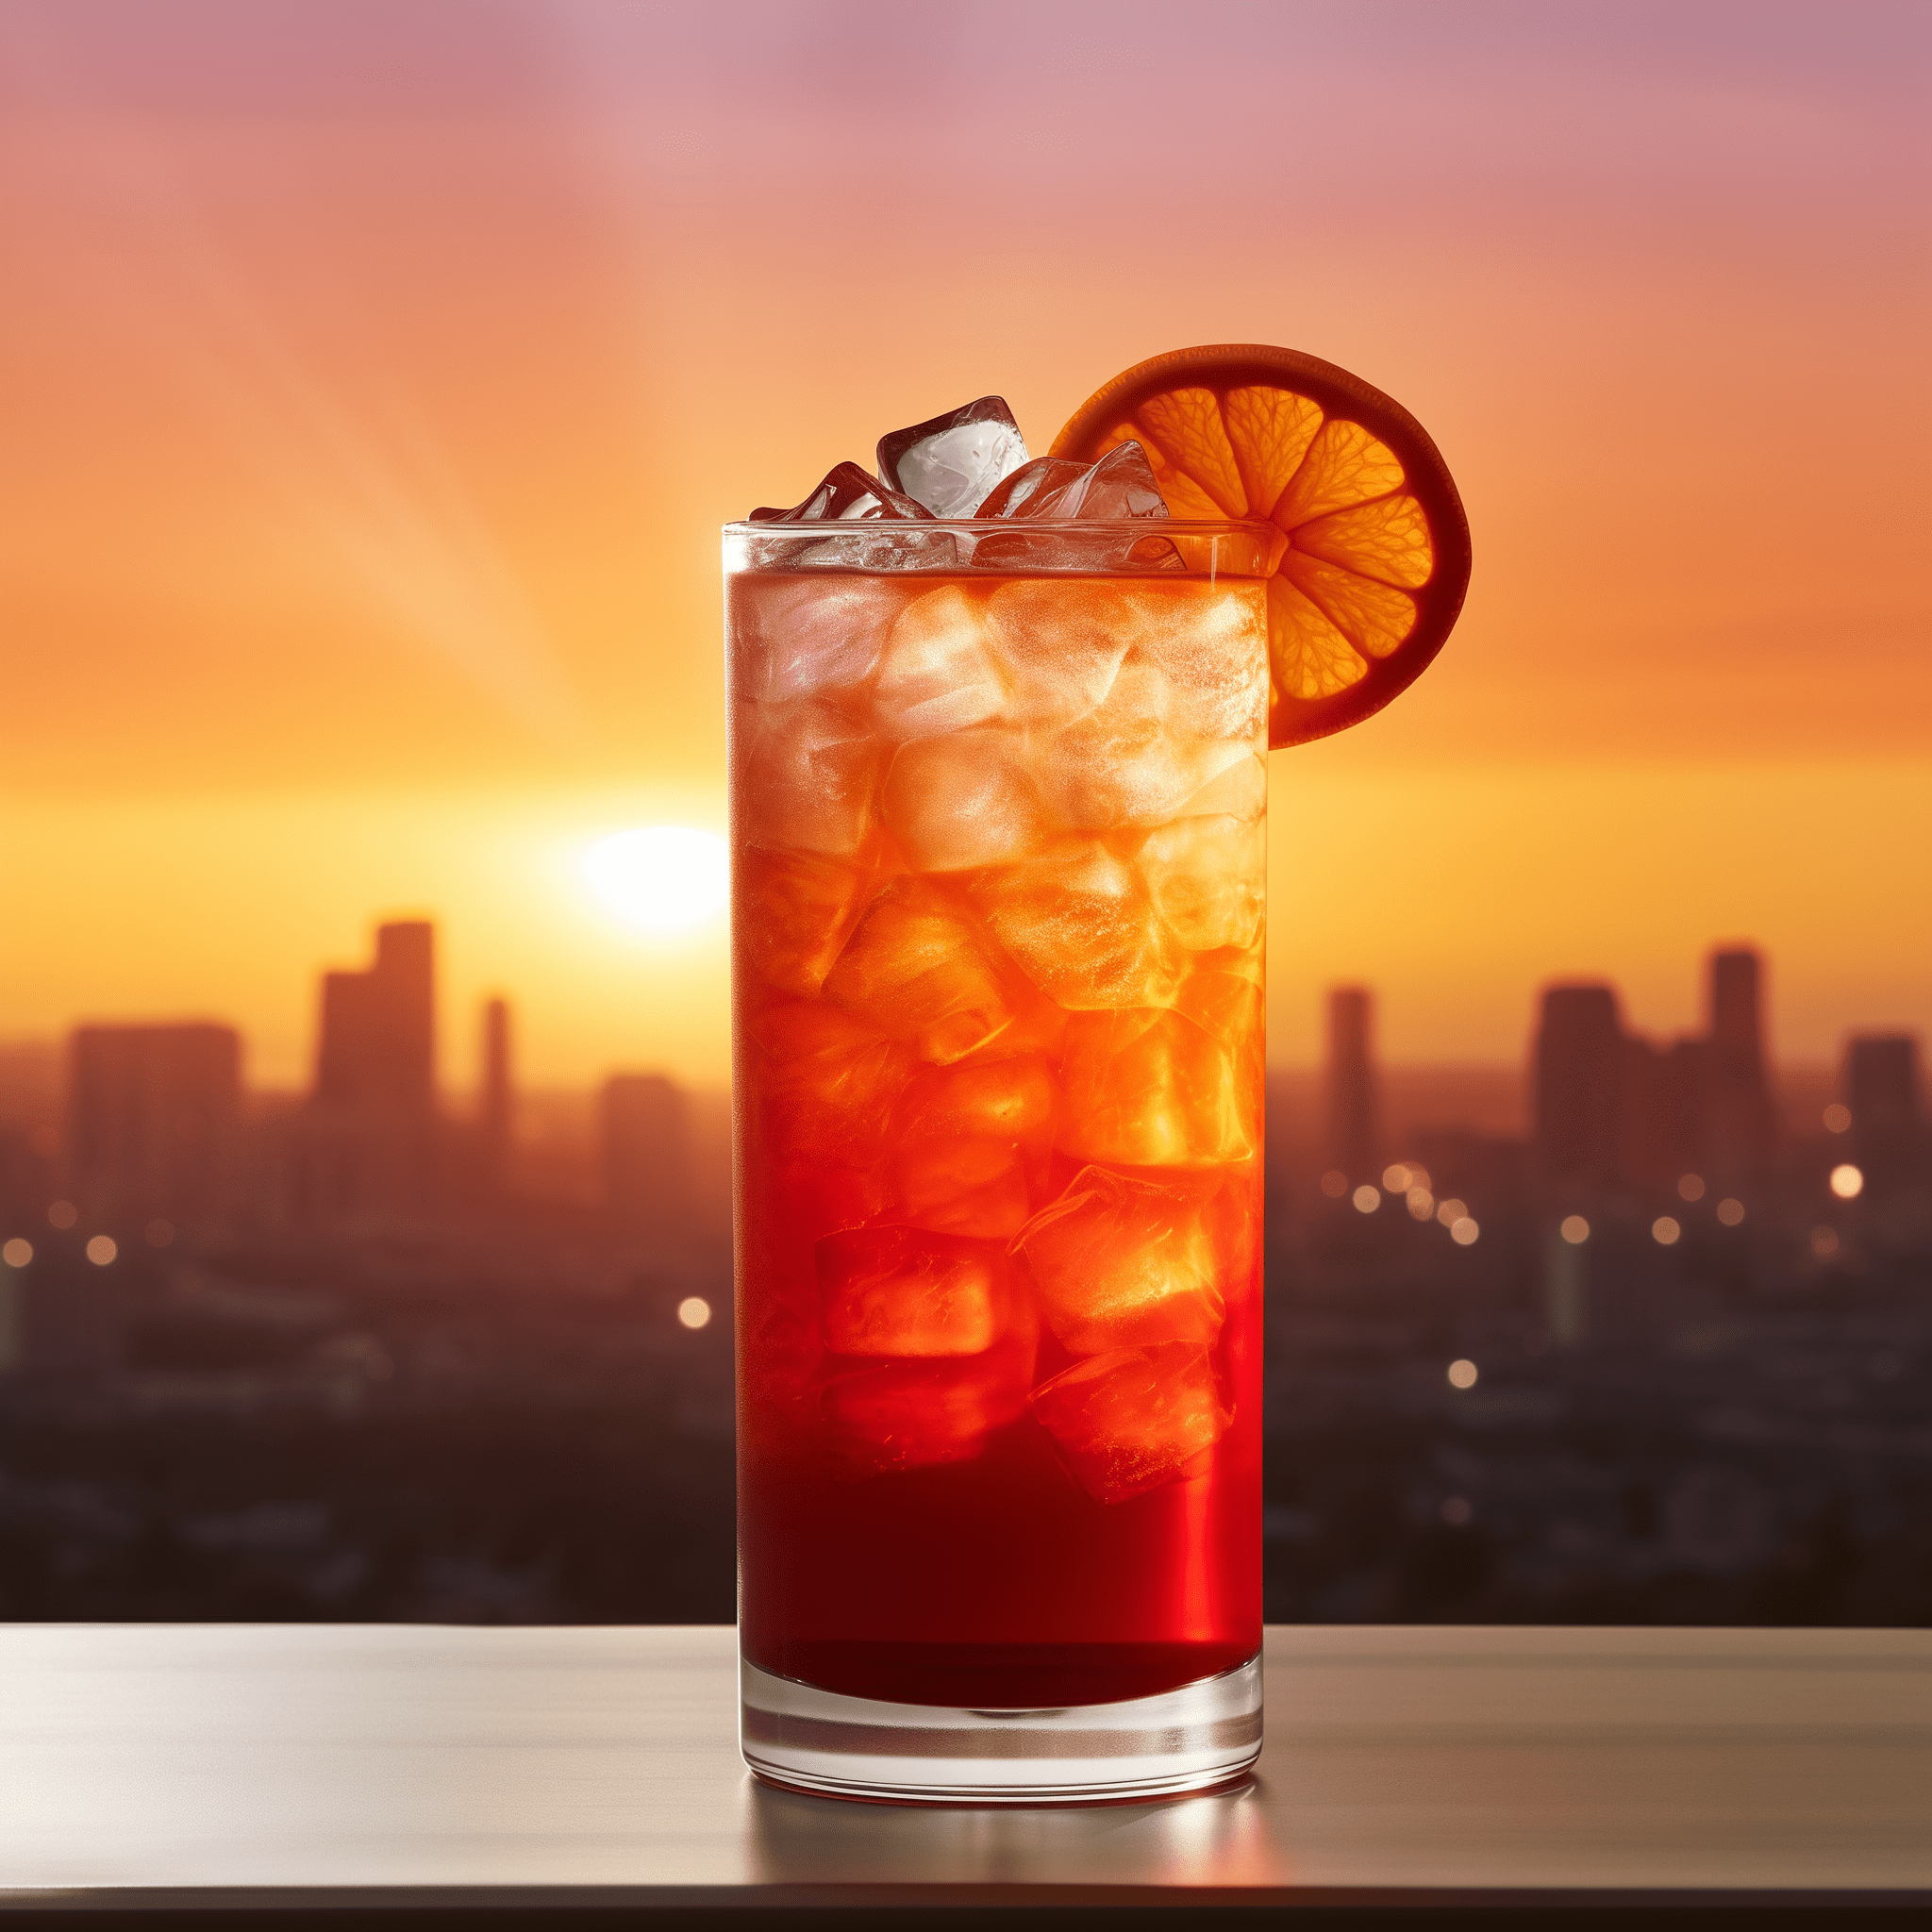 Henny Sunrise Cocktail Recipe - The Henny Sunrise offers a harmonious blend of sweet, tangy, and robust flavors. The grenadine provides a deep sweetness, while the sweet and sour mix adds a refreshing tartness. The Hennessy cognac delivers a smooth, oaky backbone with hints of vanilla and fruit.